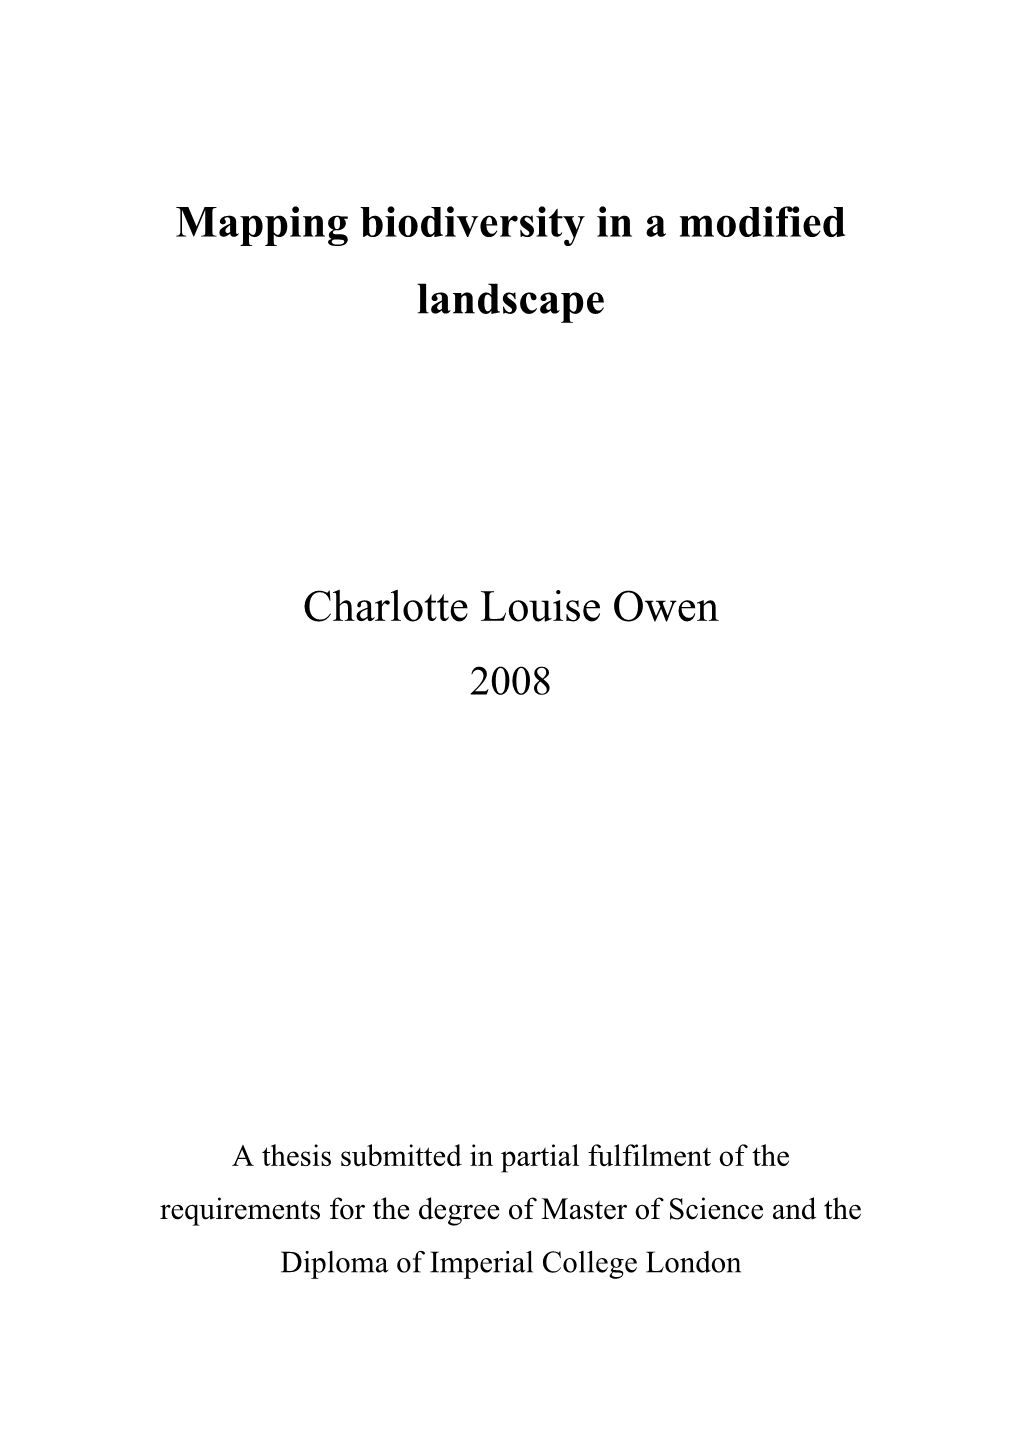 Mapping Biodiversity in a Modified Landscape Charlotte Louise Owen